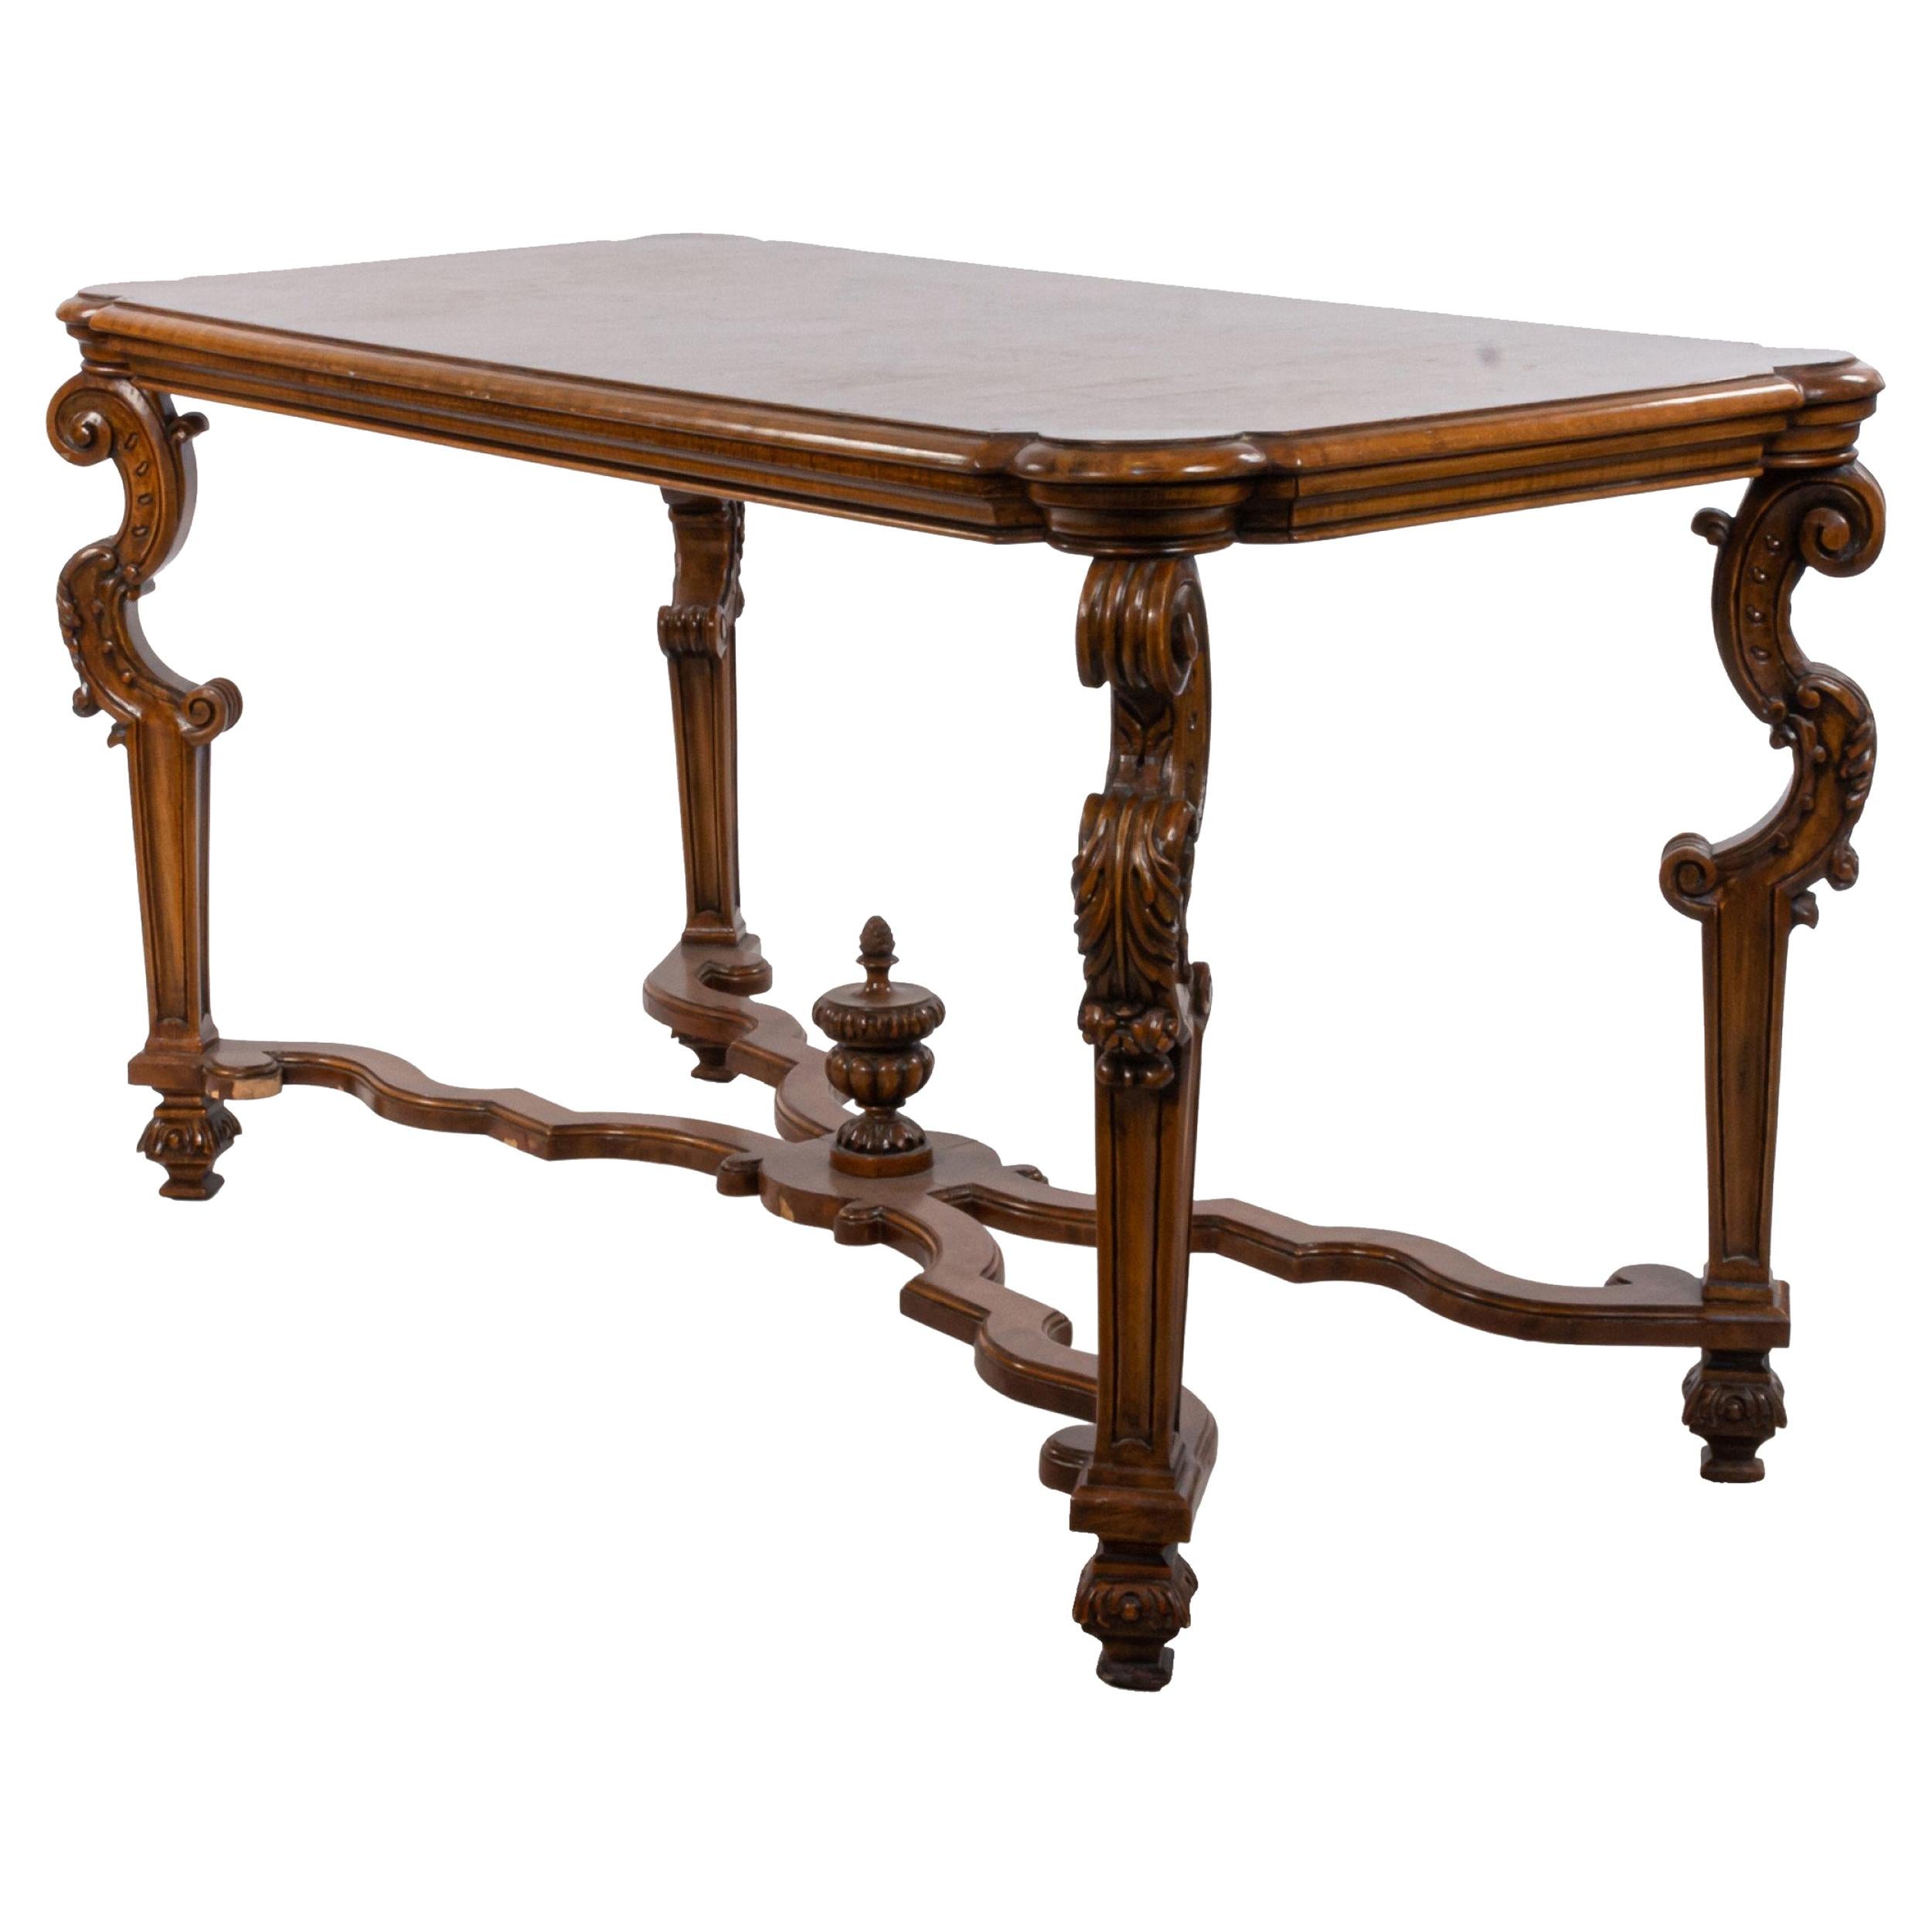 Renaissance Style Dining Table with Scalloped X-bar Stretcher